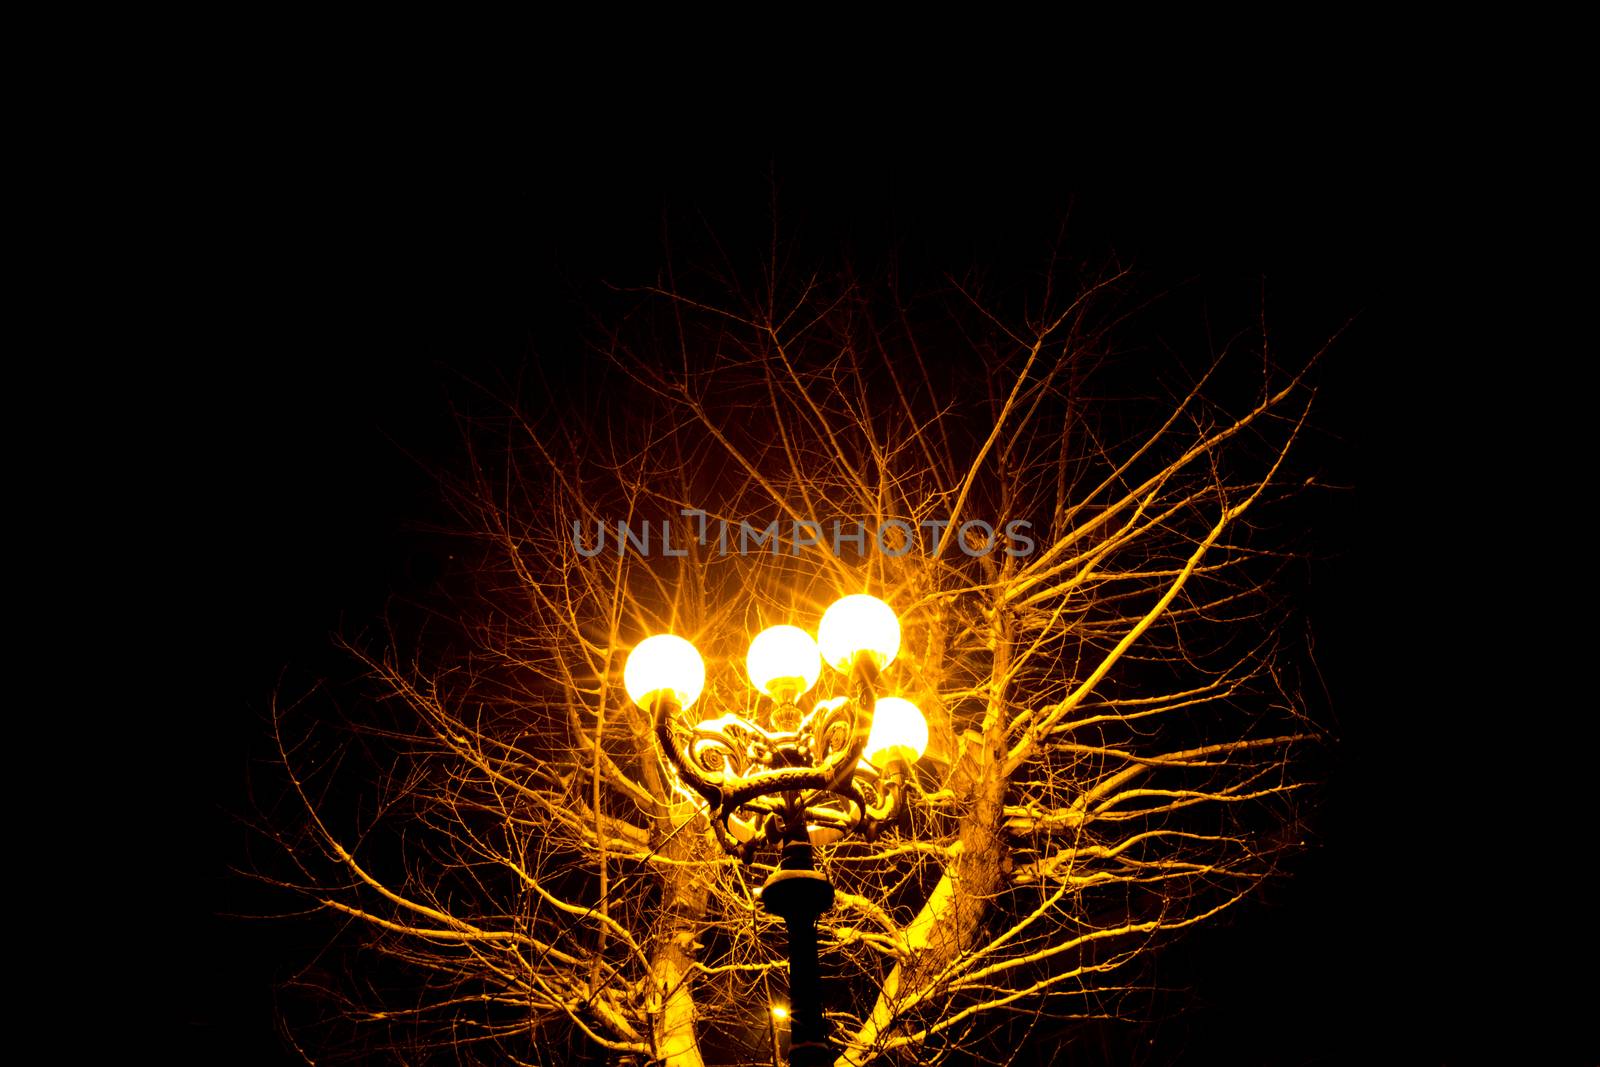 Lantern at Night With a Tree in the Background by DamantisZ